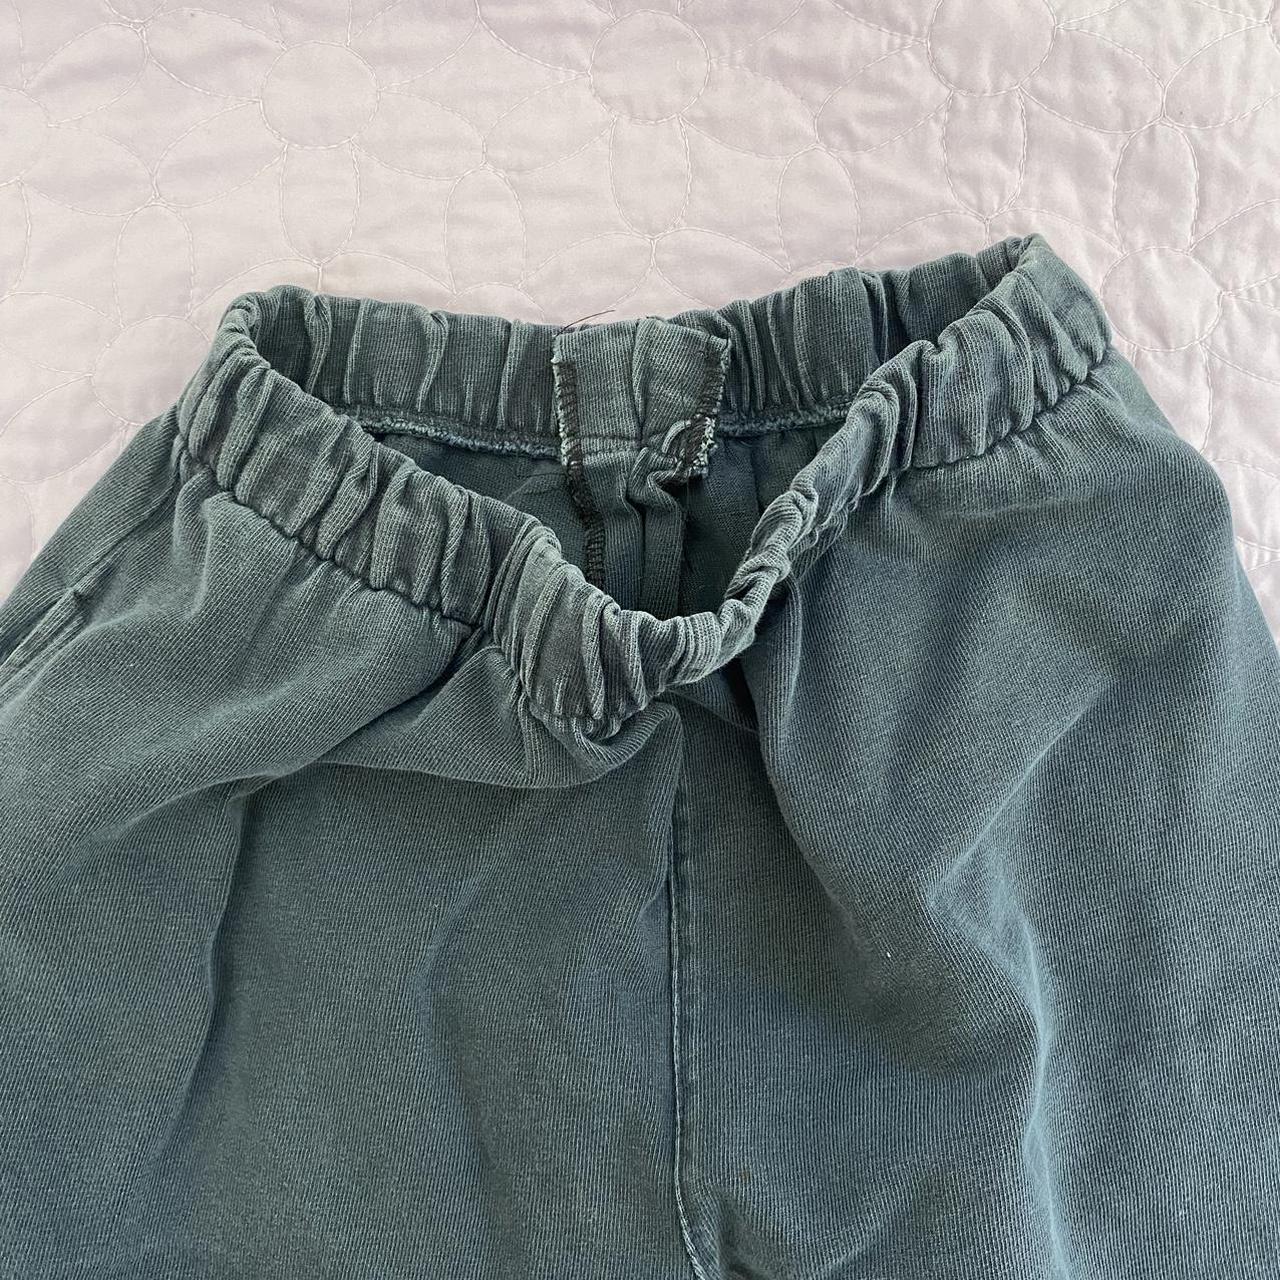 Brandy Melville Women's Navy and Blue Joggers-tracksuits (2)